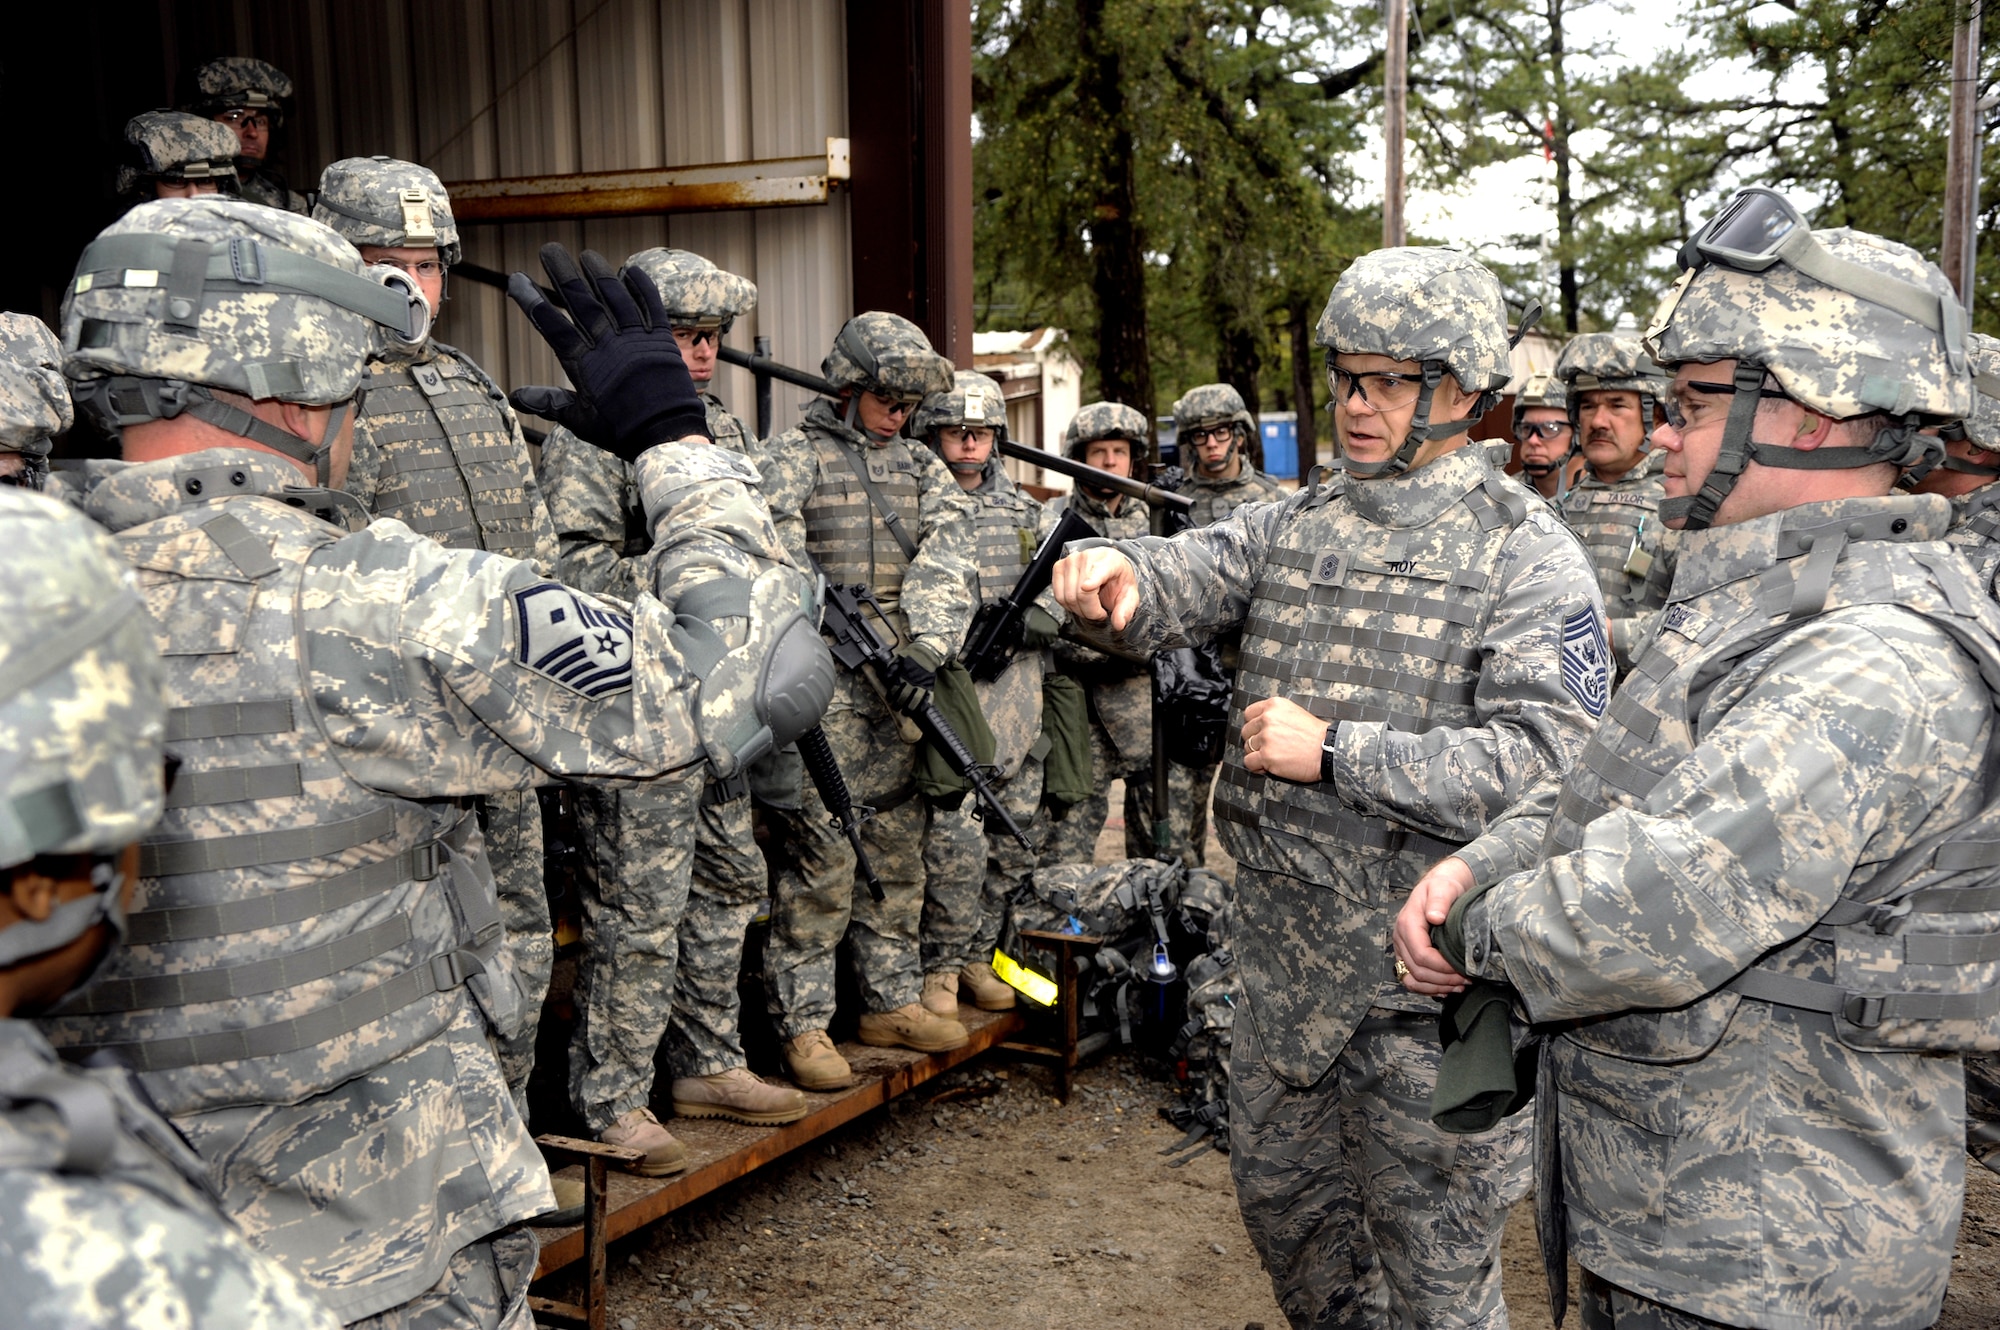 Chief Master Sgt. of the Air Force James A. Roy holds a question and answer session while visiting Airmen during Combat Skills Training April 27, 2010, at Joint Base McGuire-Dix-Lakehurst, N.J. (U.S. Air Force photo/Carlos Cintron)